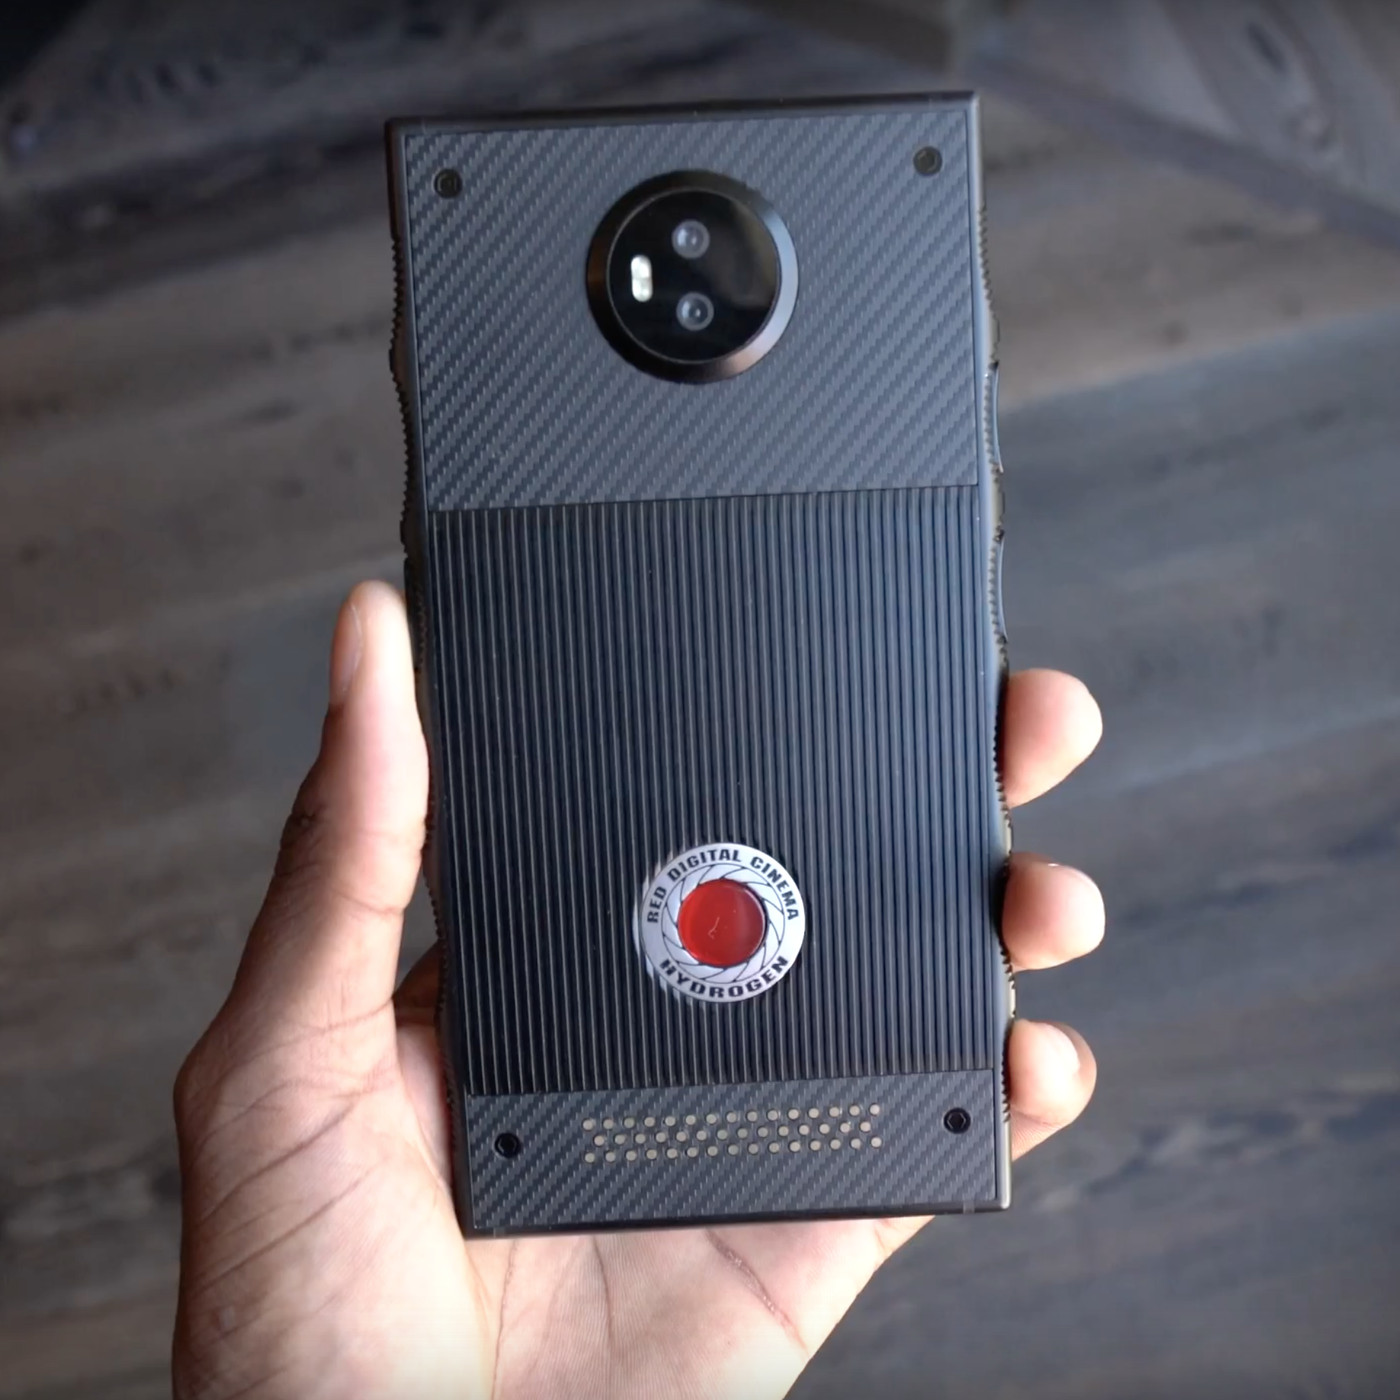 RED's upcoming $1,200 smartphone is enormous - The Verge